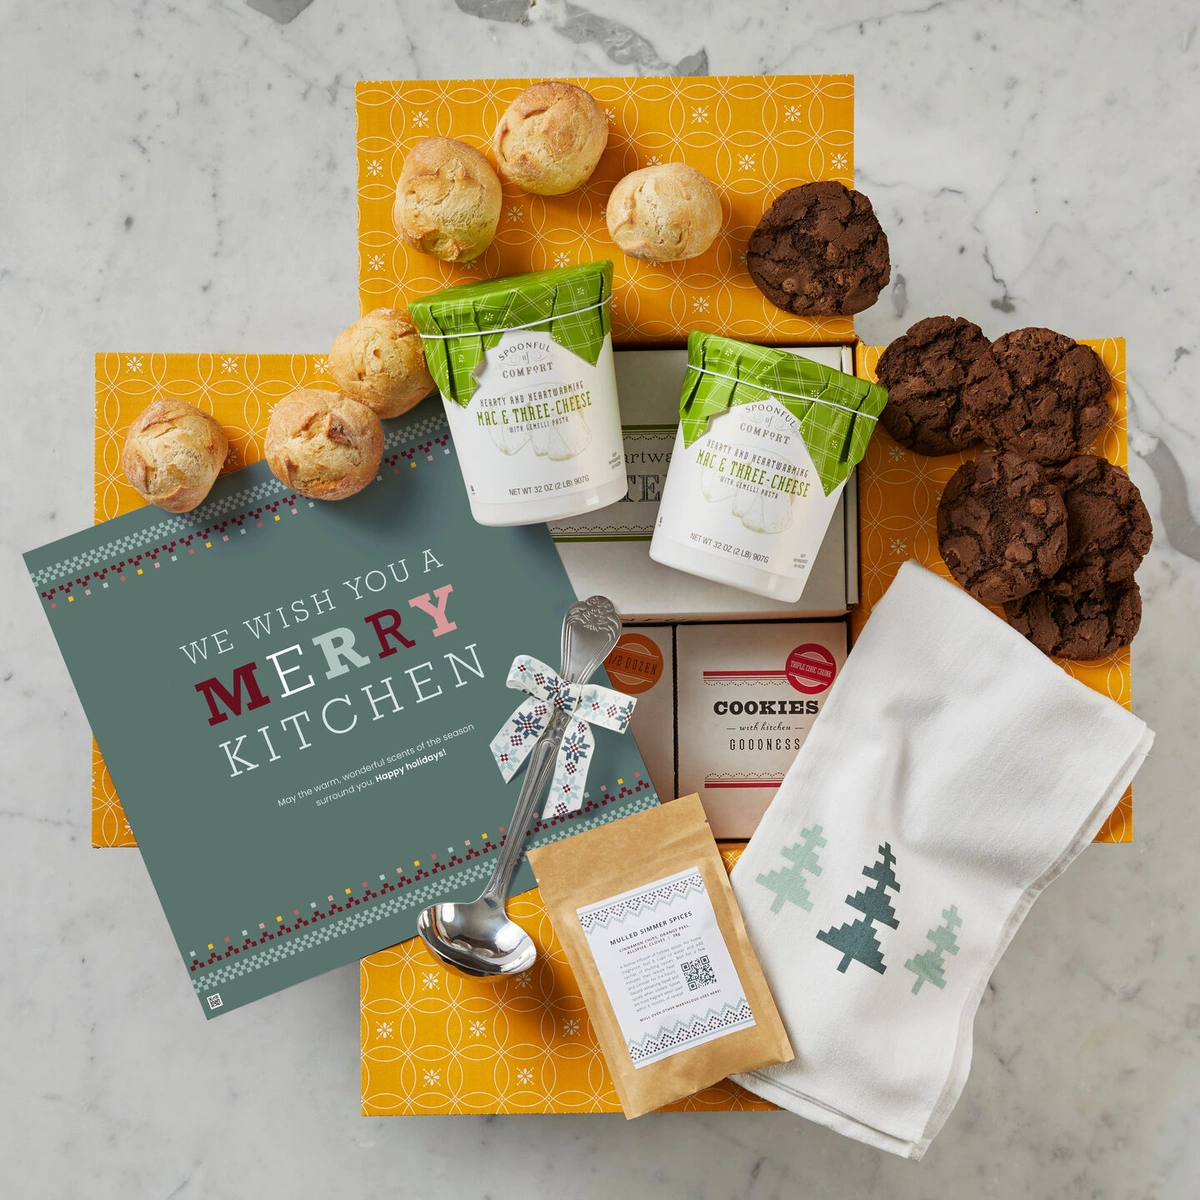 A sign that says "We Wish You a Merry Kitchen" sits next two a couple packages of soup, 6 cookies, a ladel, a kitchen towel, a package of mulled simmer spices and two sets of 3 rolls.